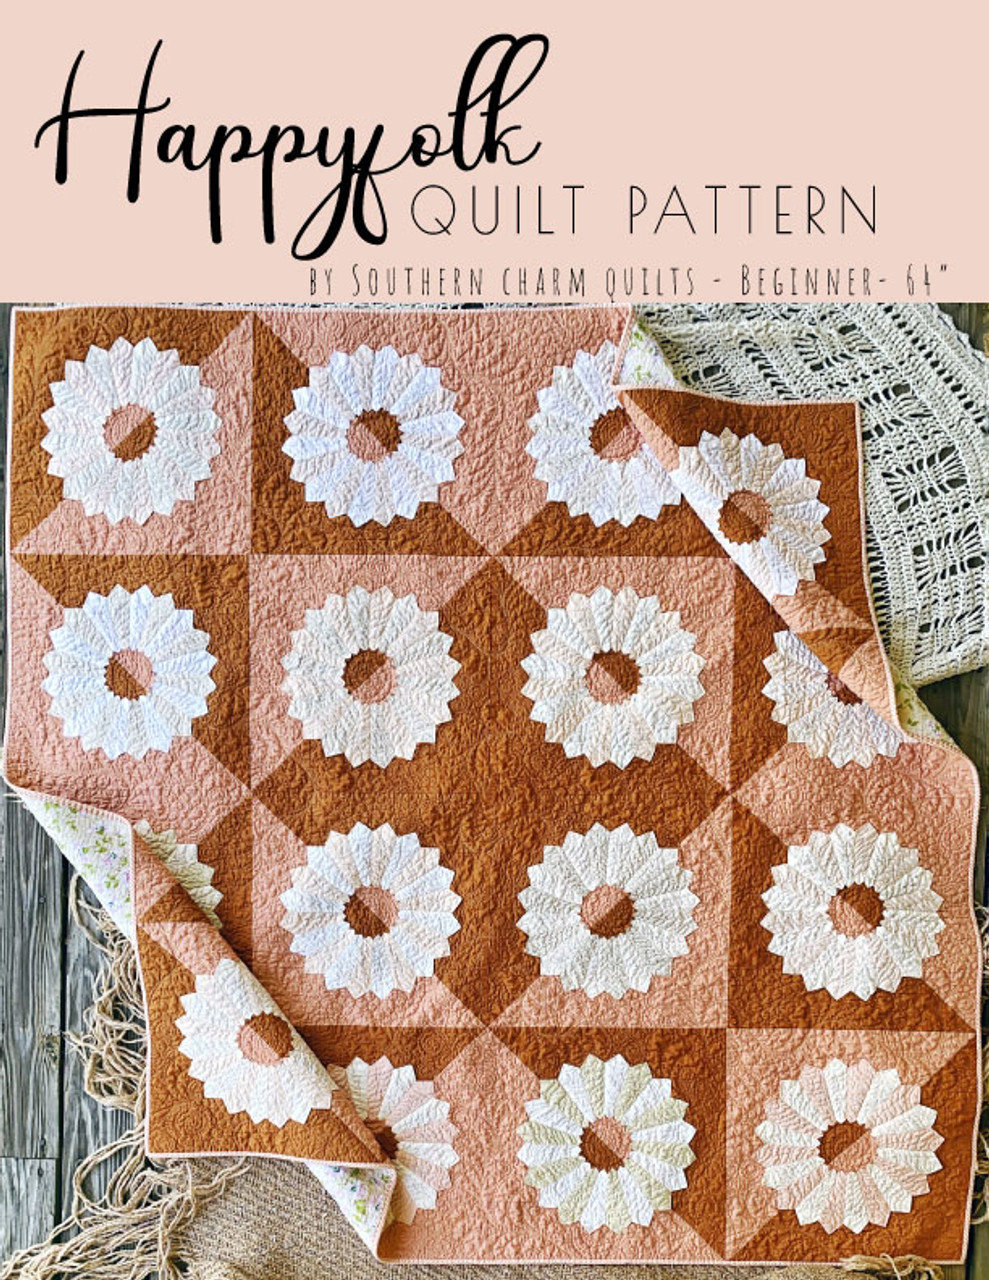 Project Sheets - Sewing and Quilting – Clover Needlecraft, Inc.